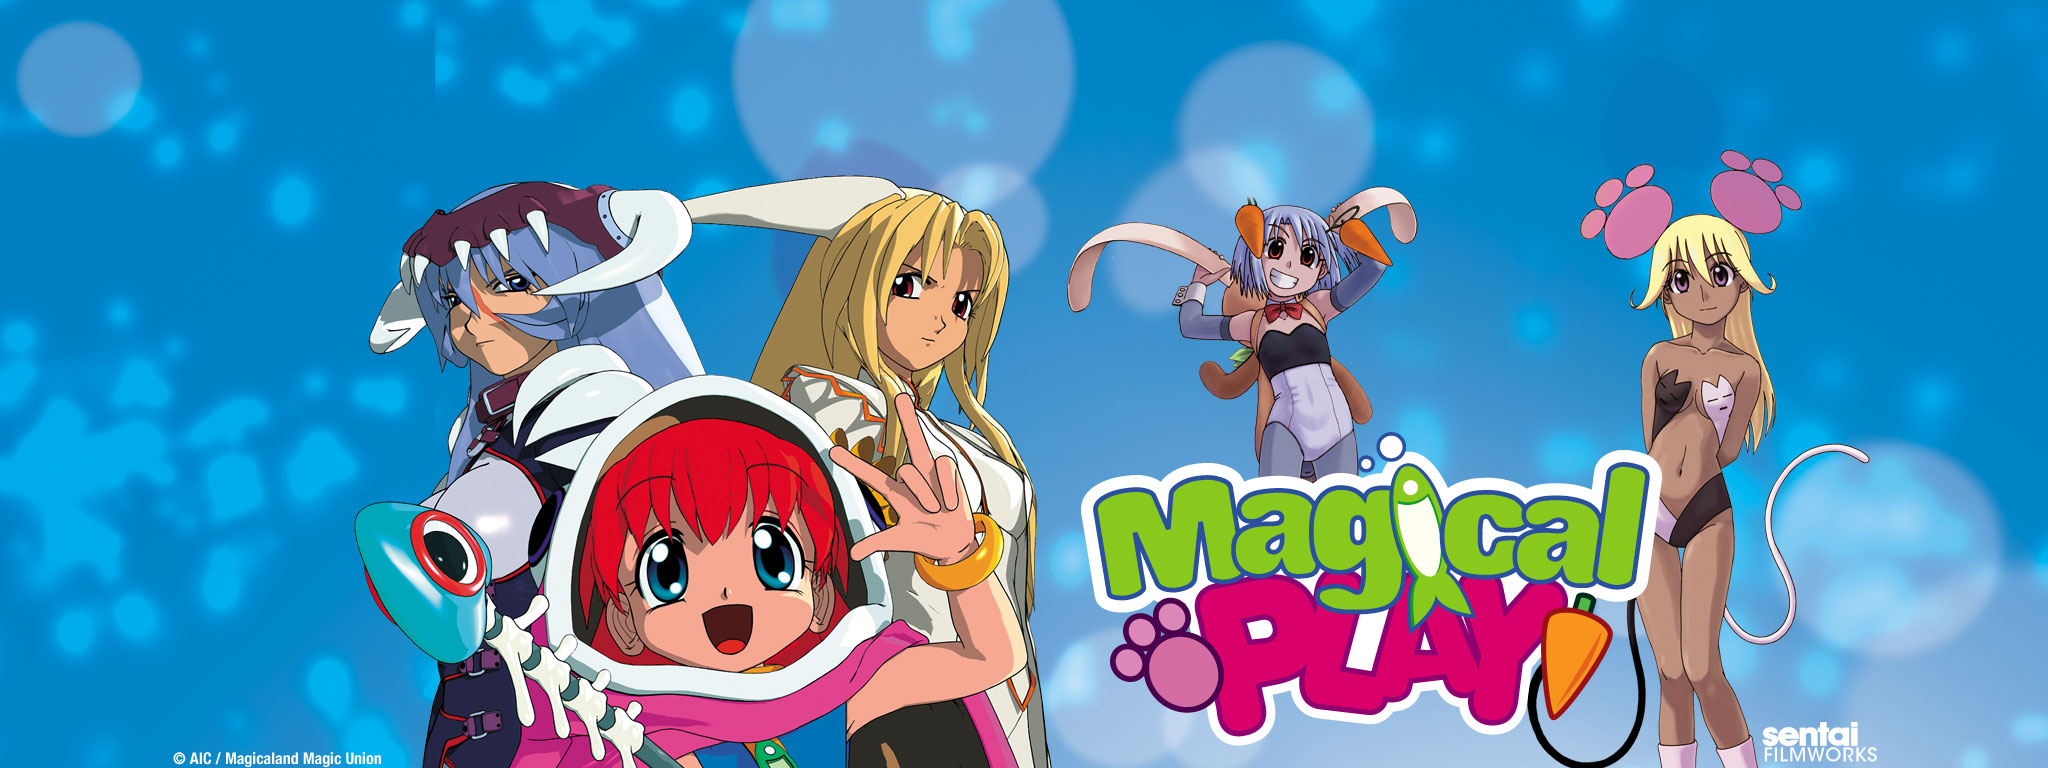 Title Art for Magical Play